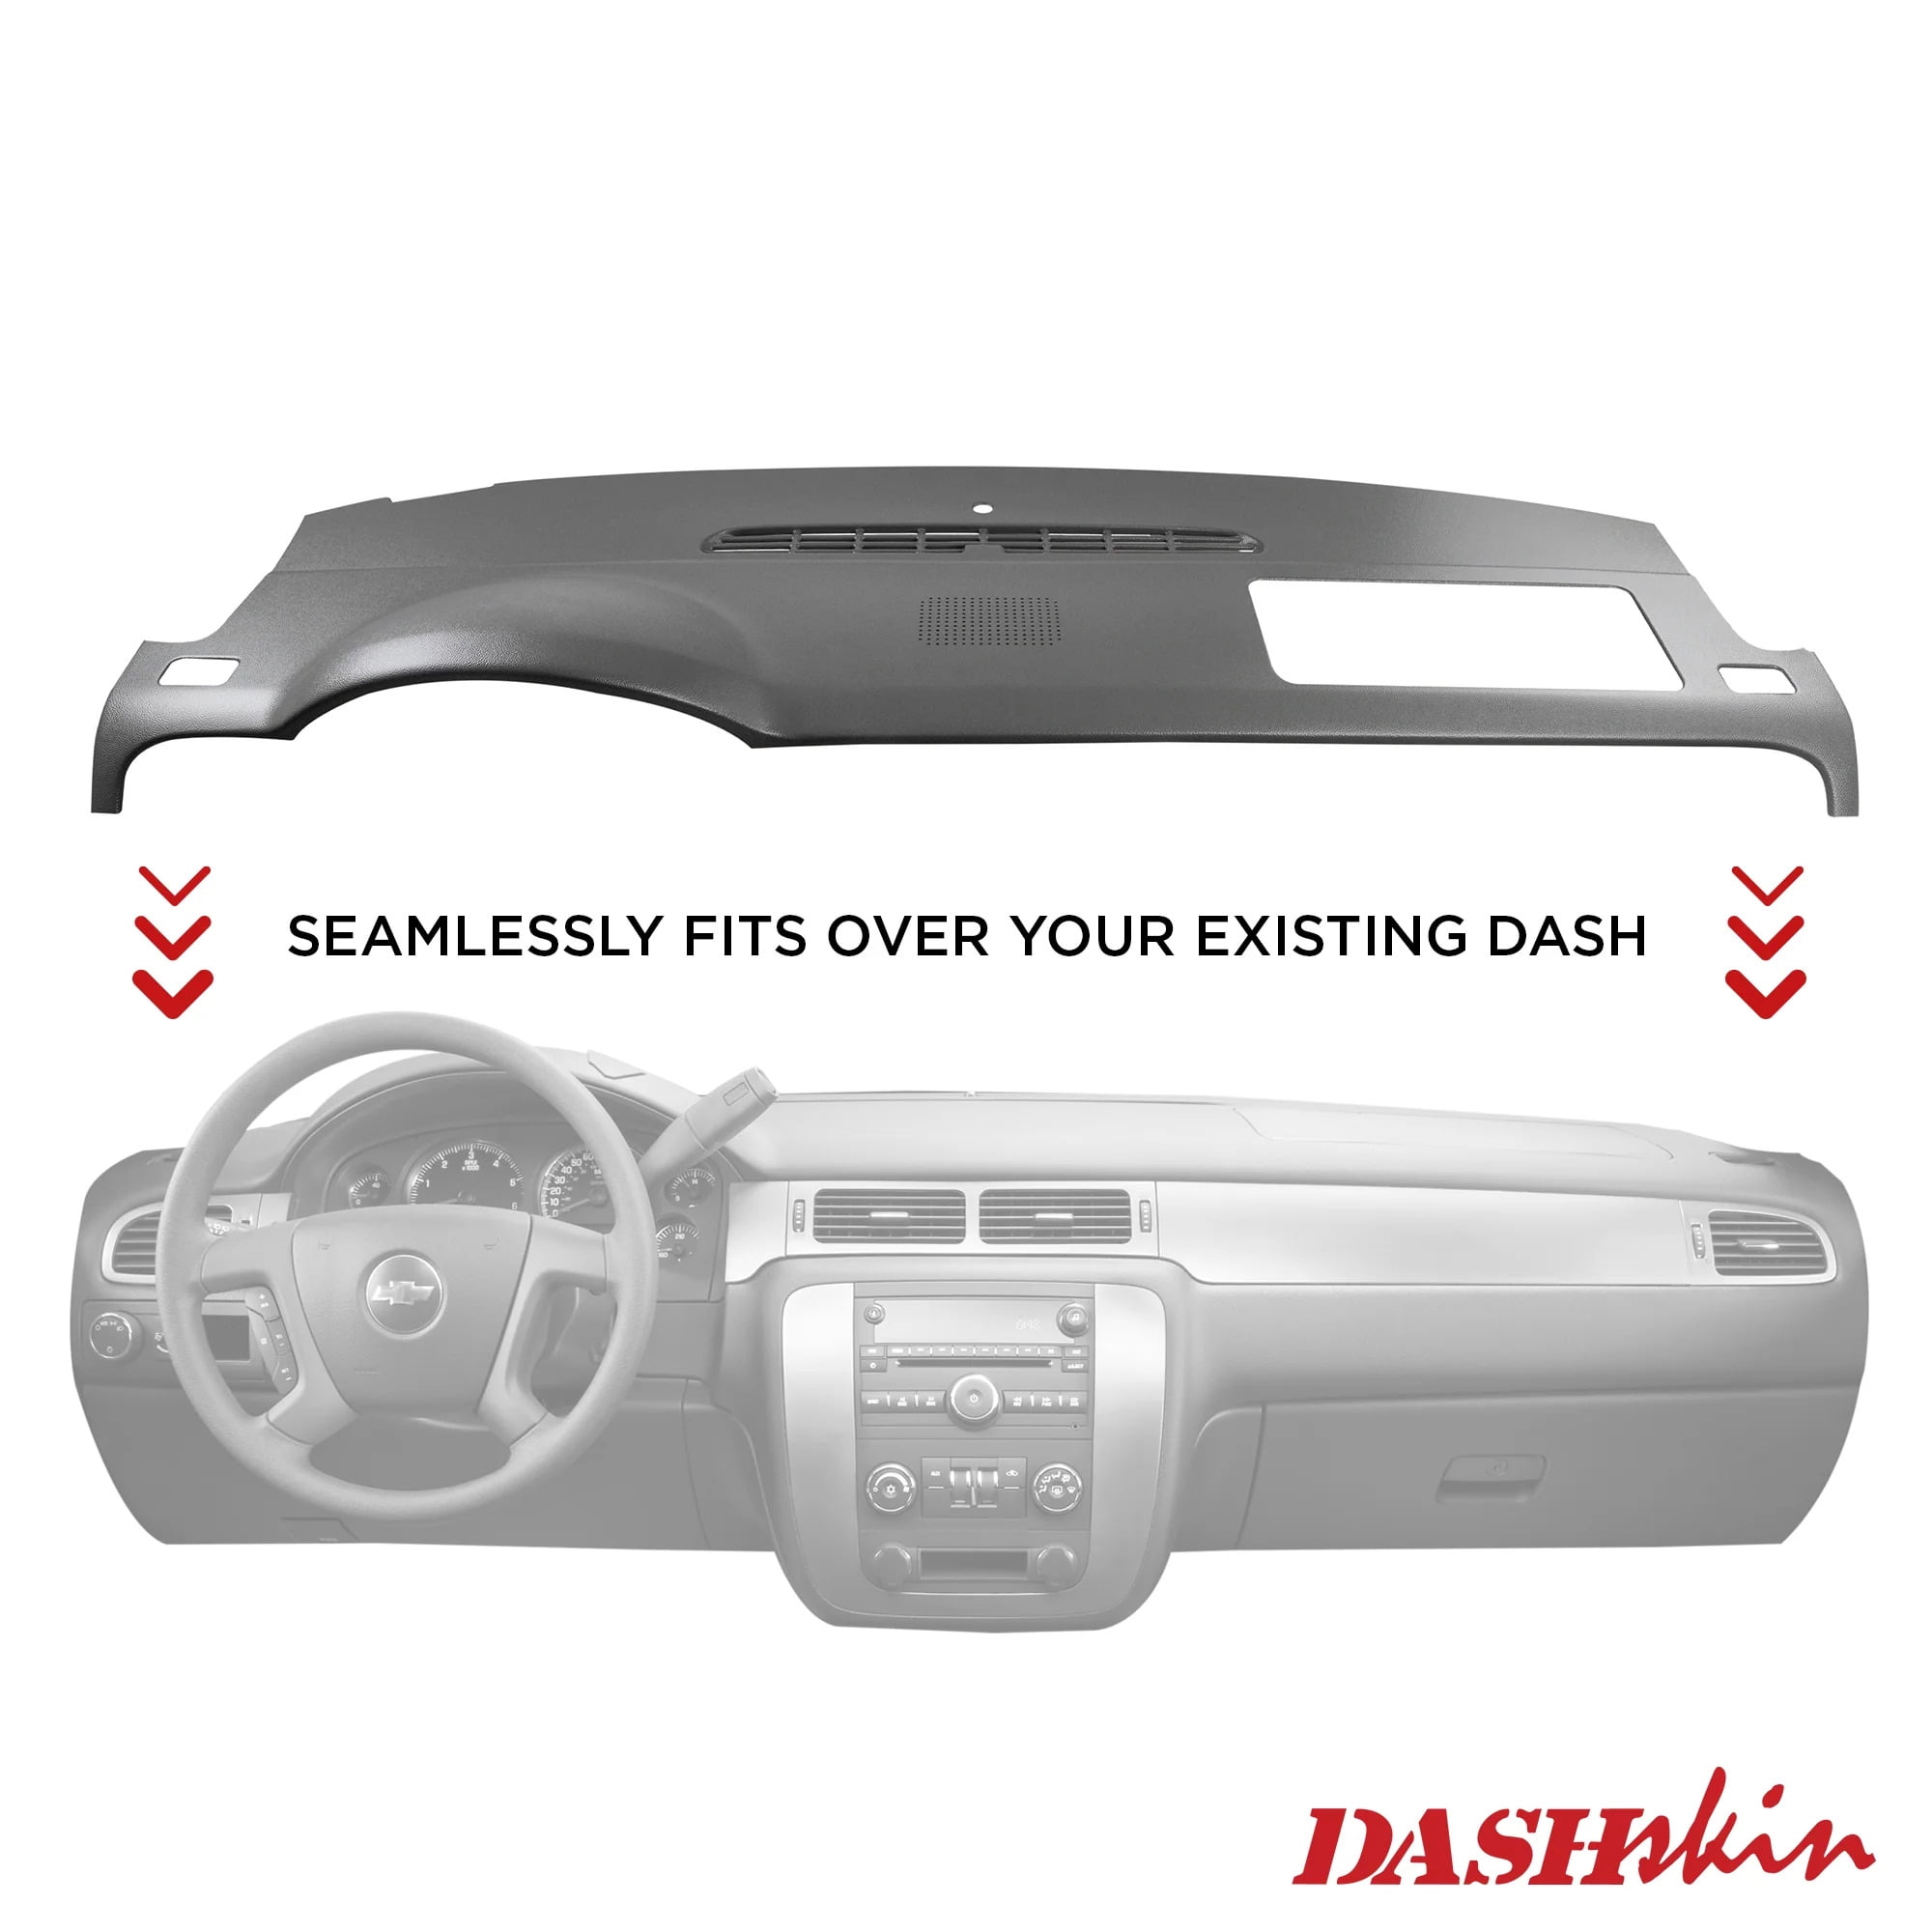 1996 Chevy OBS DashSkin Install: Factory-Fresh Look Without The